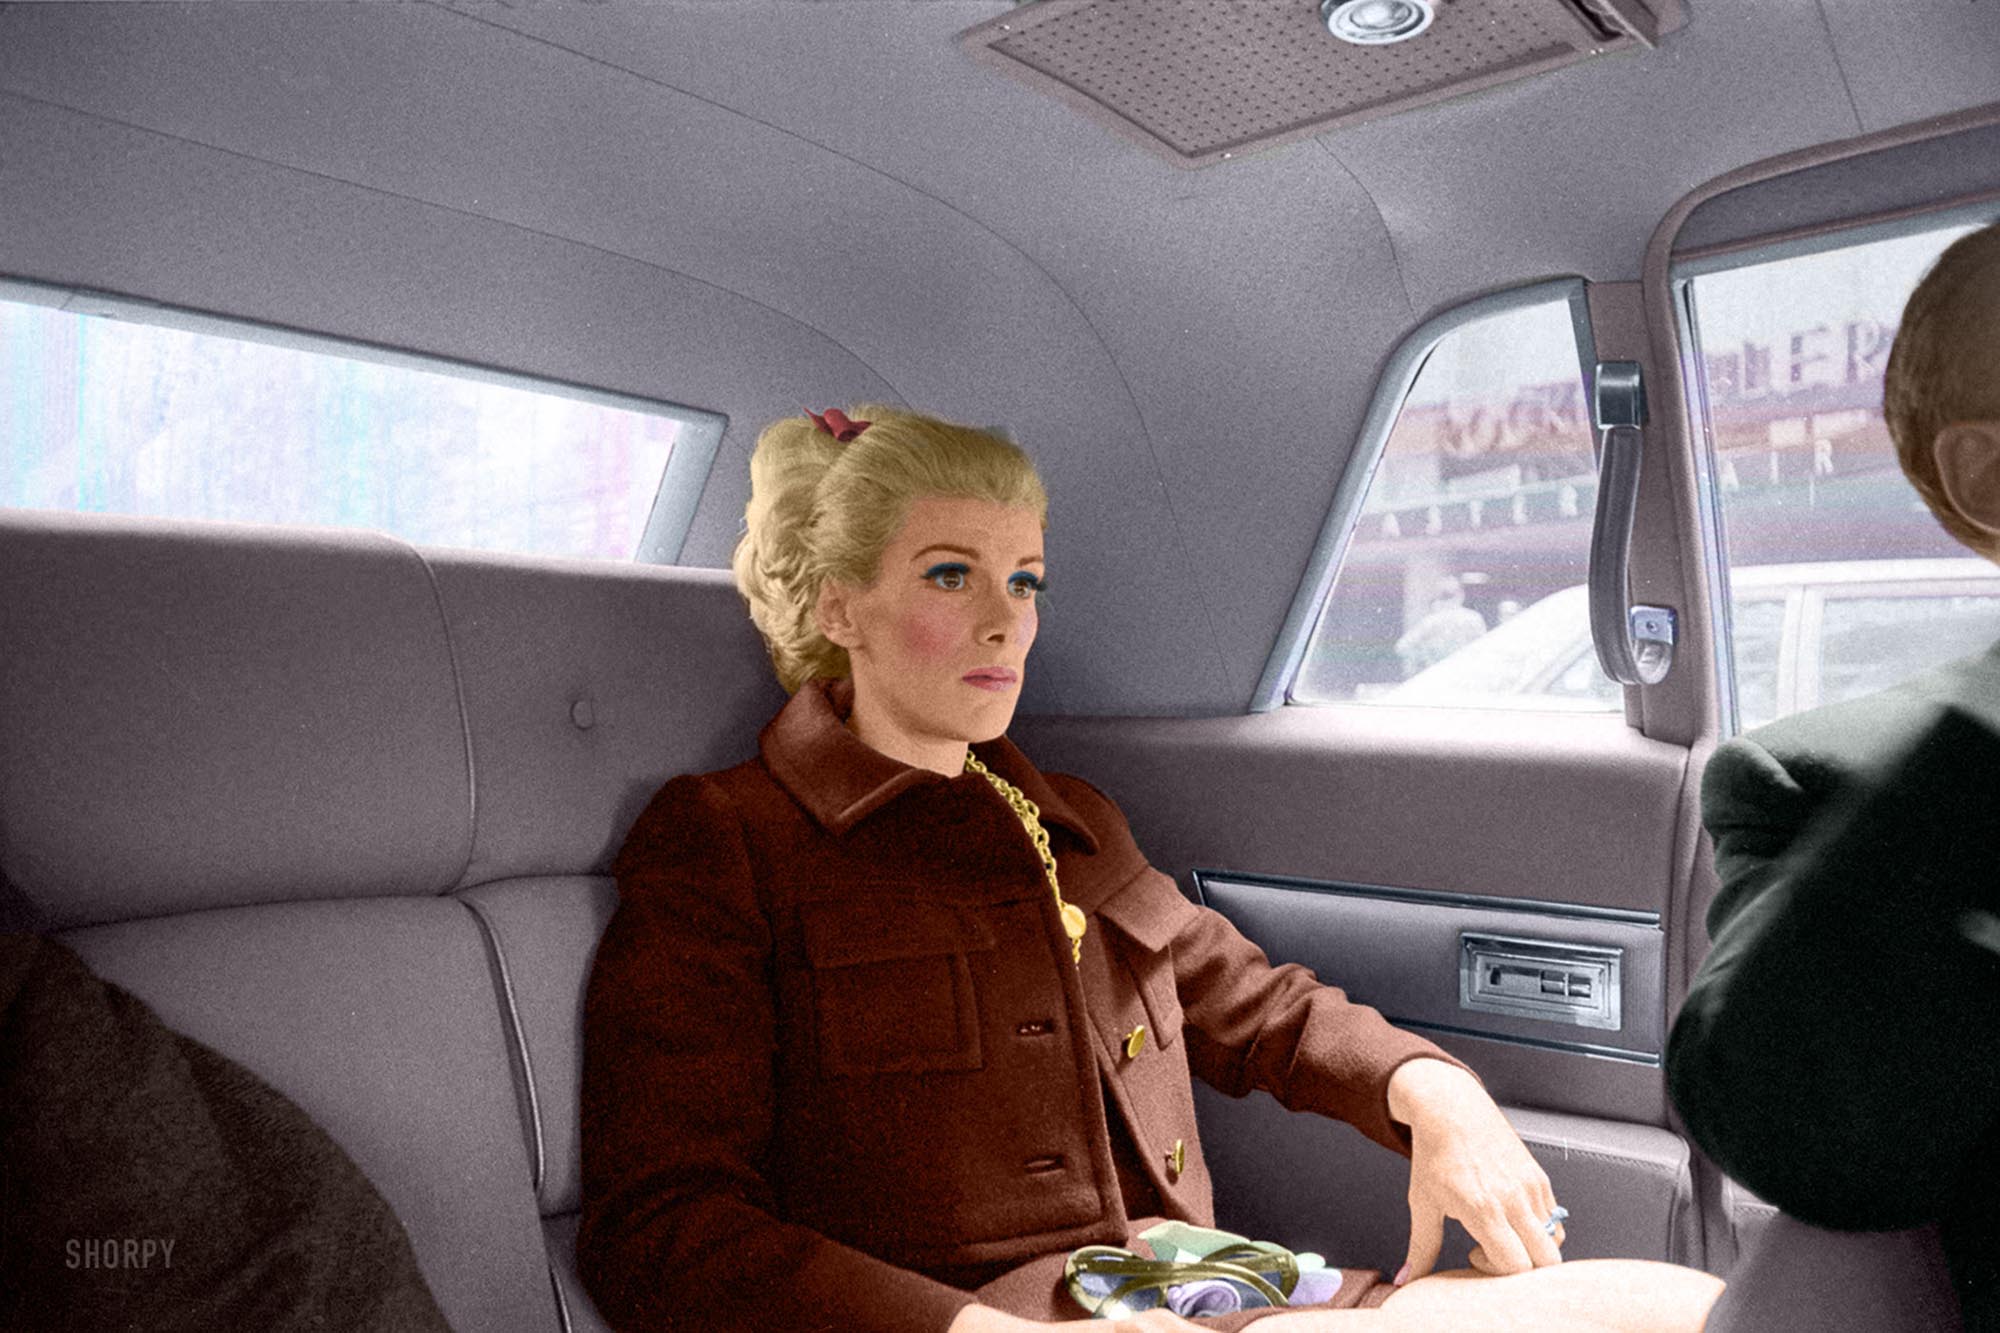 My colorized version of comedian Joan Rivers in this Shorpy photograph.